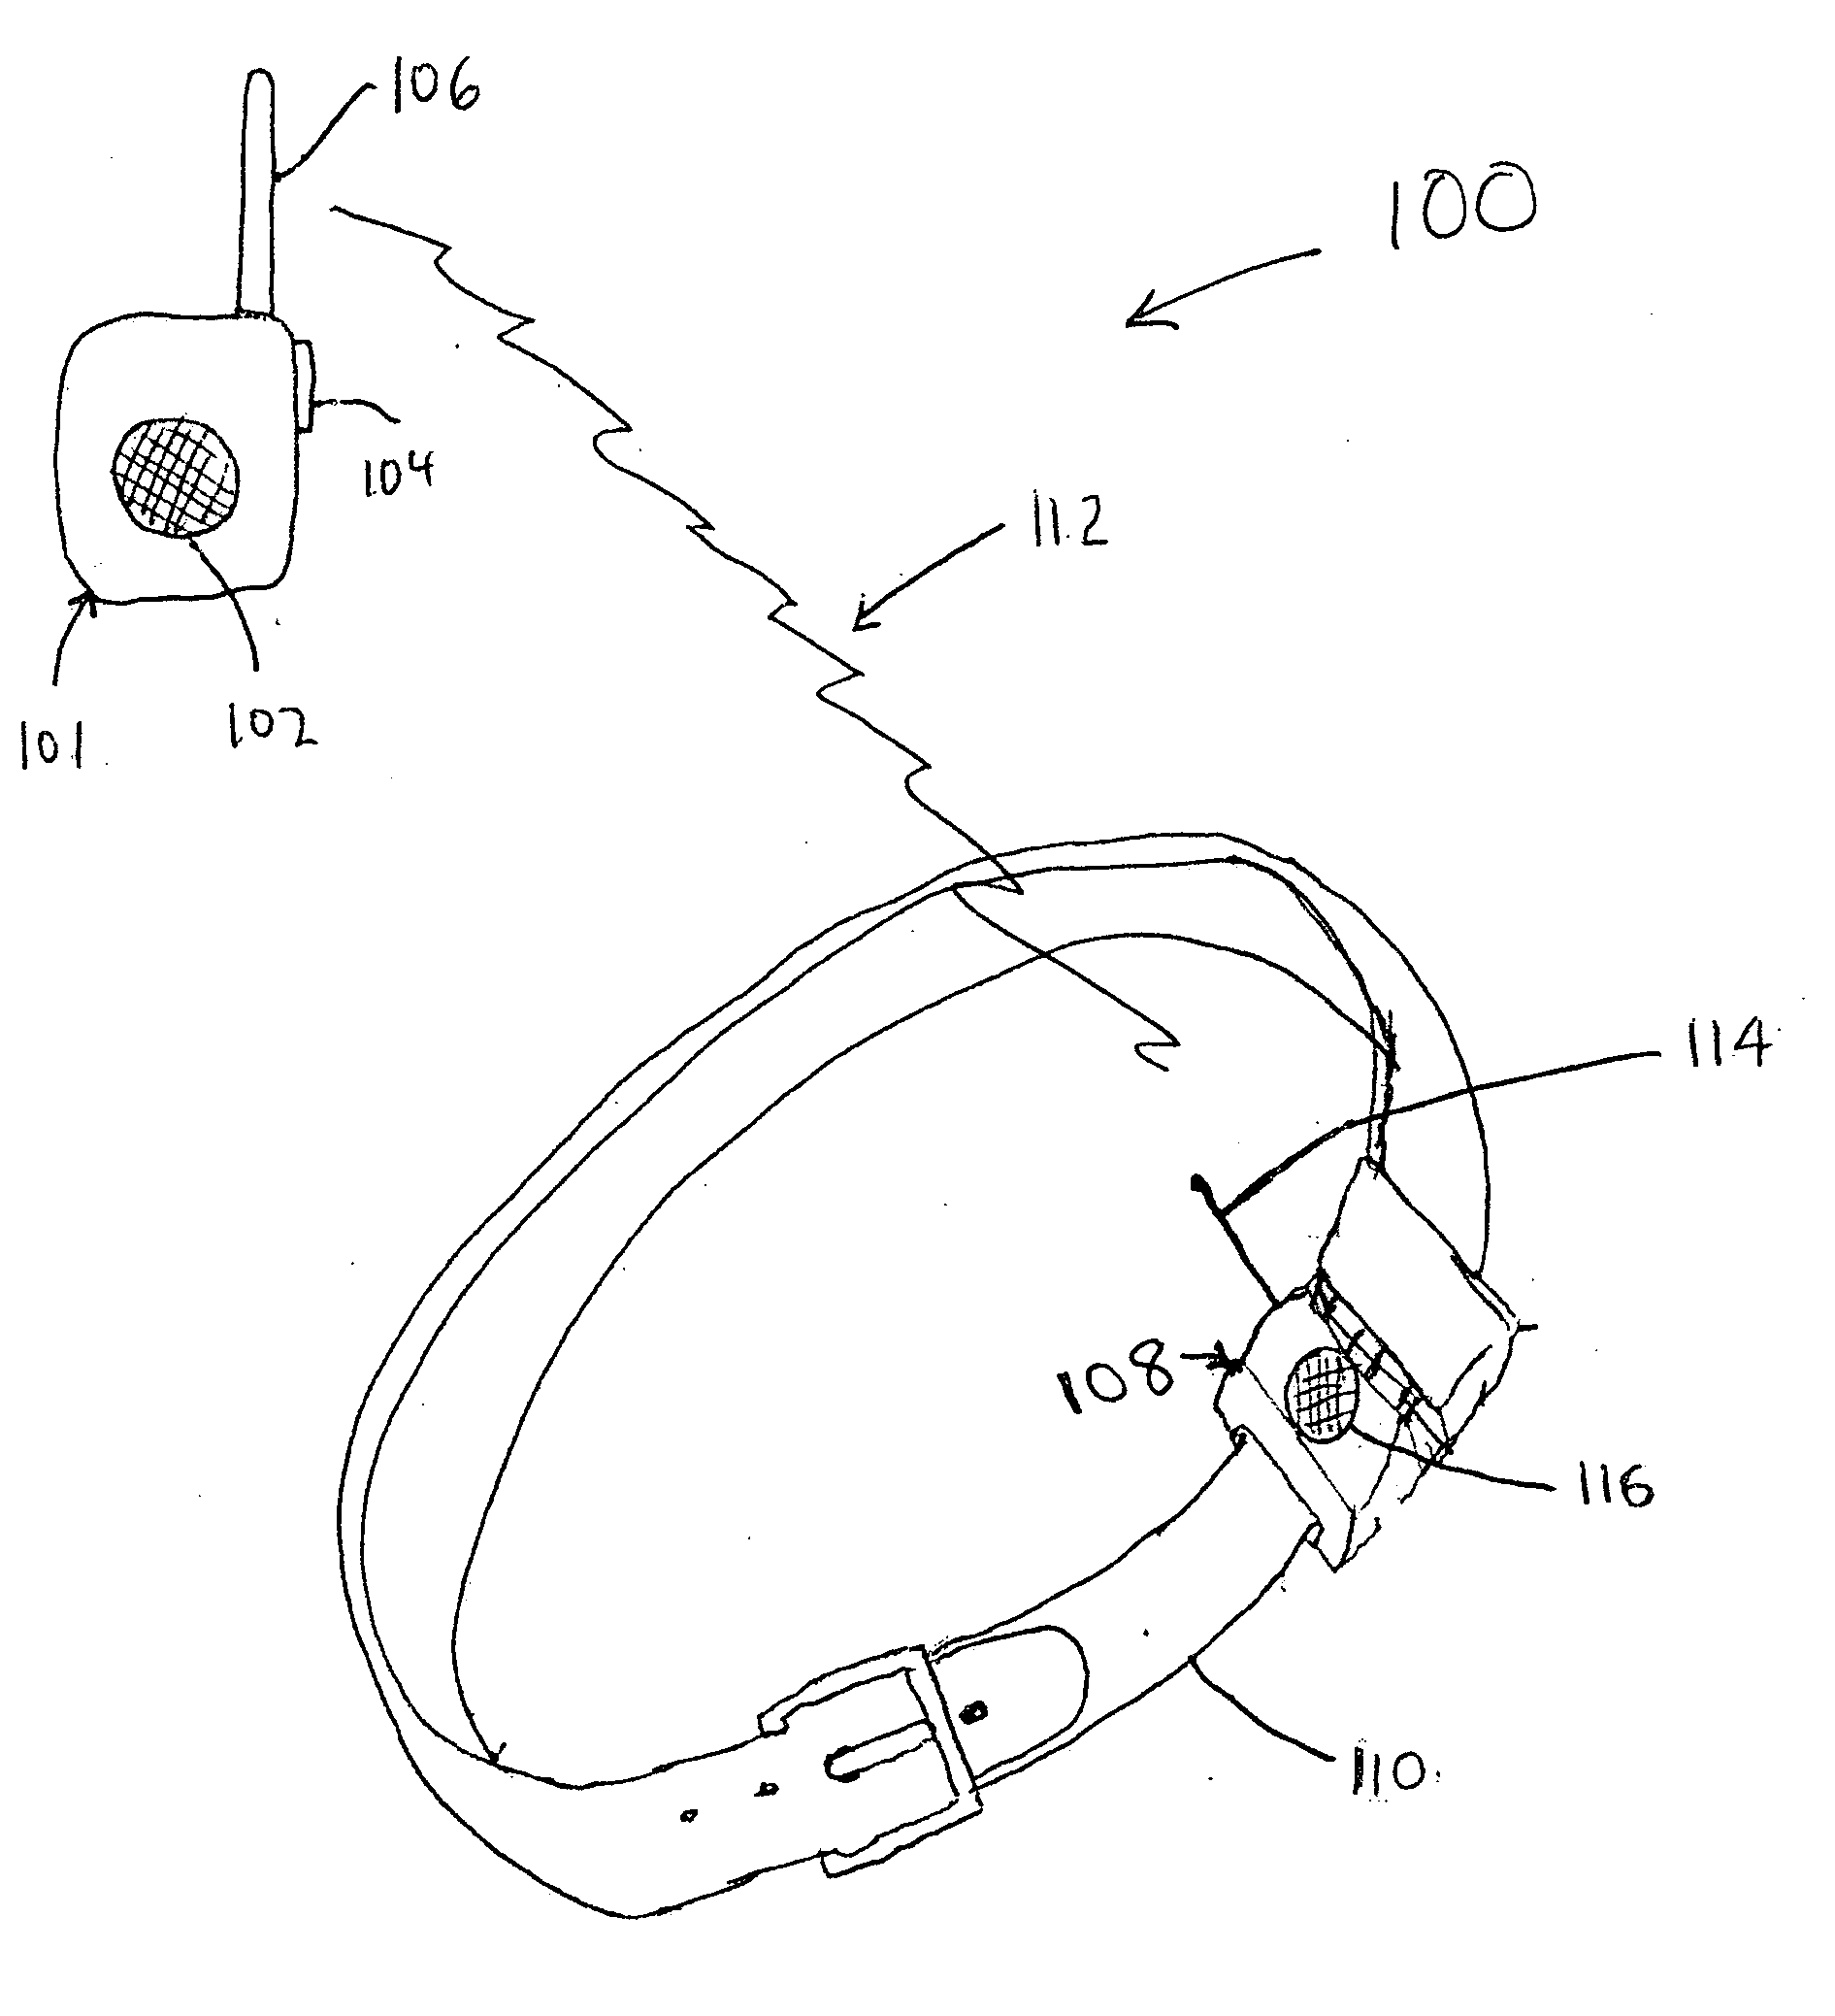 Method and apparatus for wireless message transmission using device worn by animal